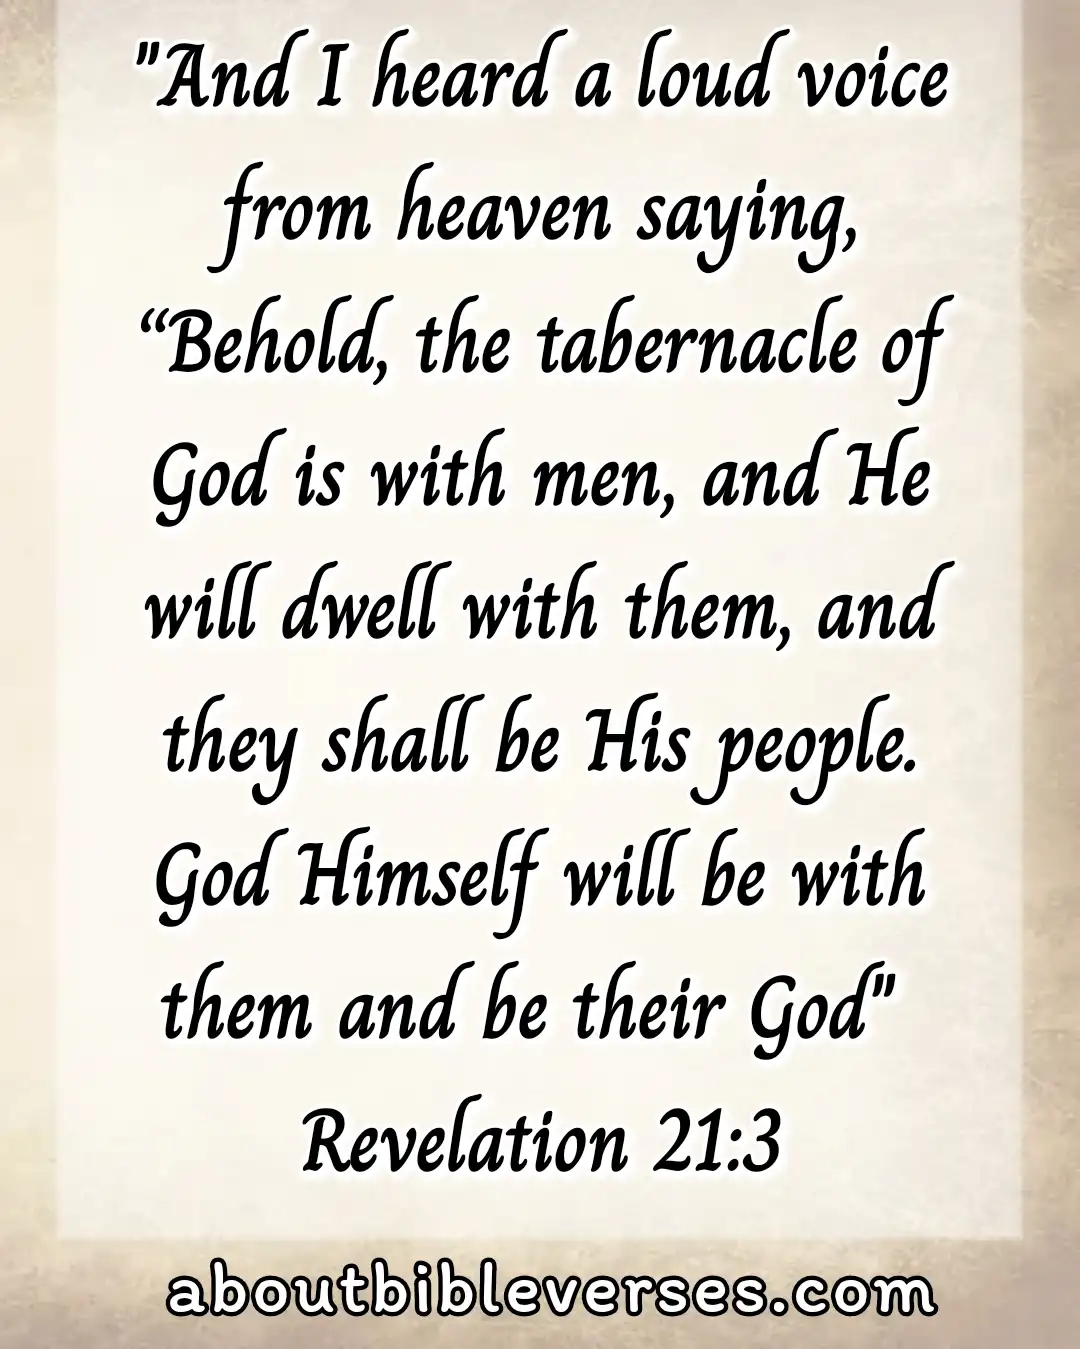 Bible verse about hope for the future (Revelation 21:3)